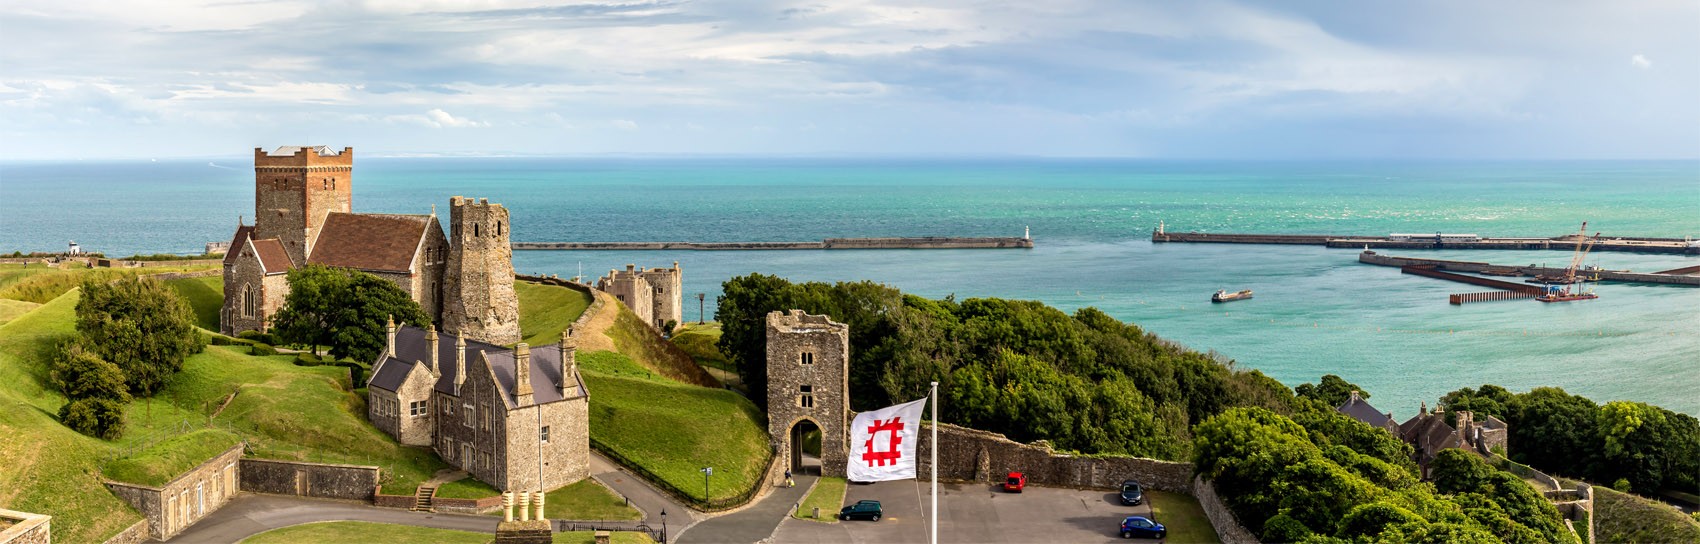 Dover Castle in Kent. Photograph by ALEXEY FEDORENKO